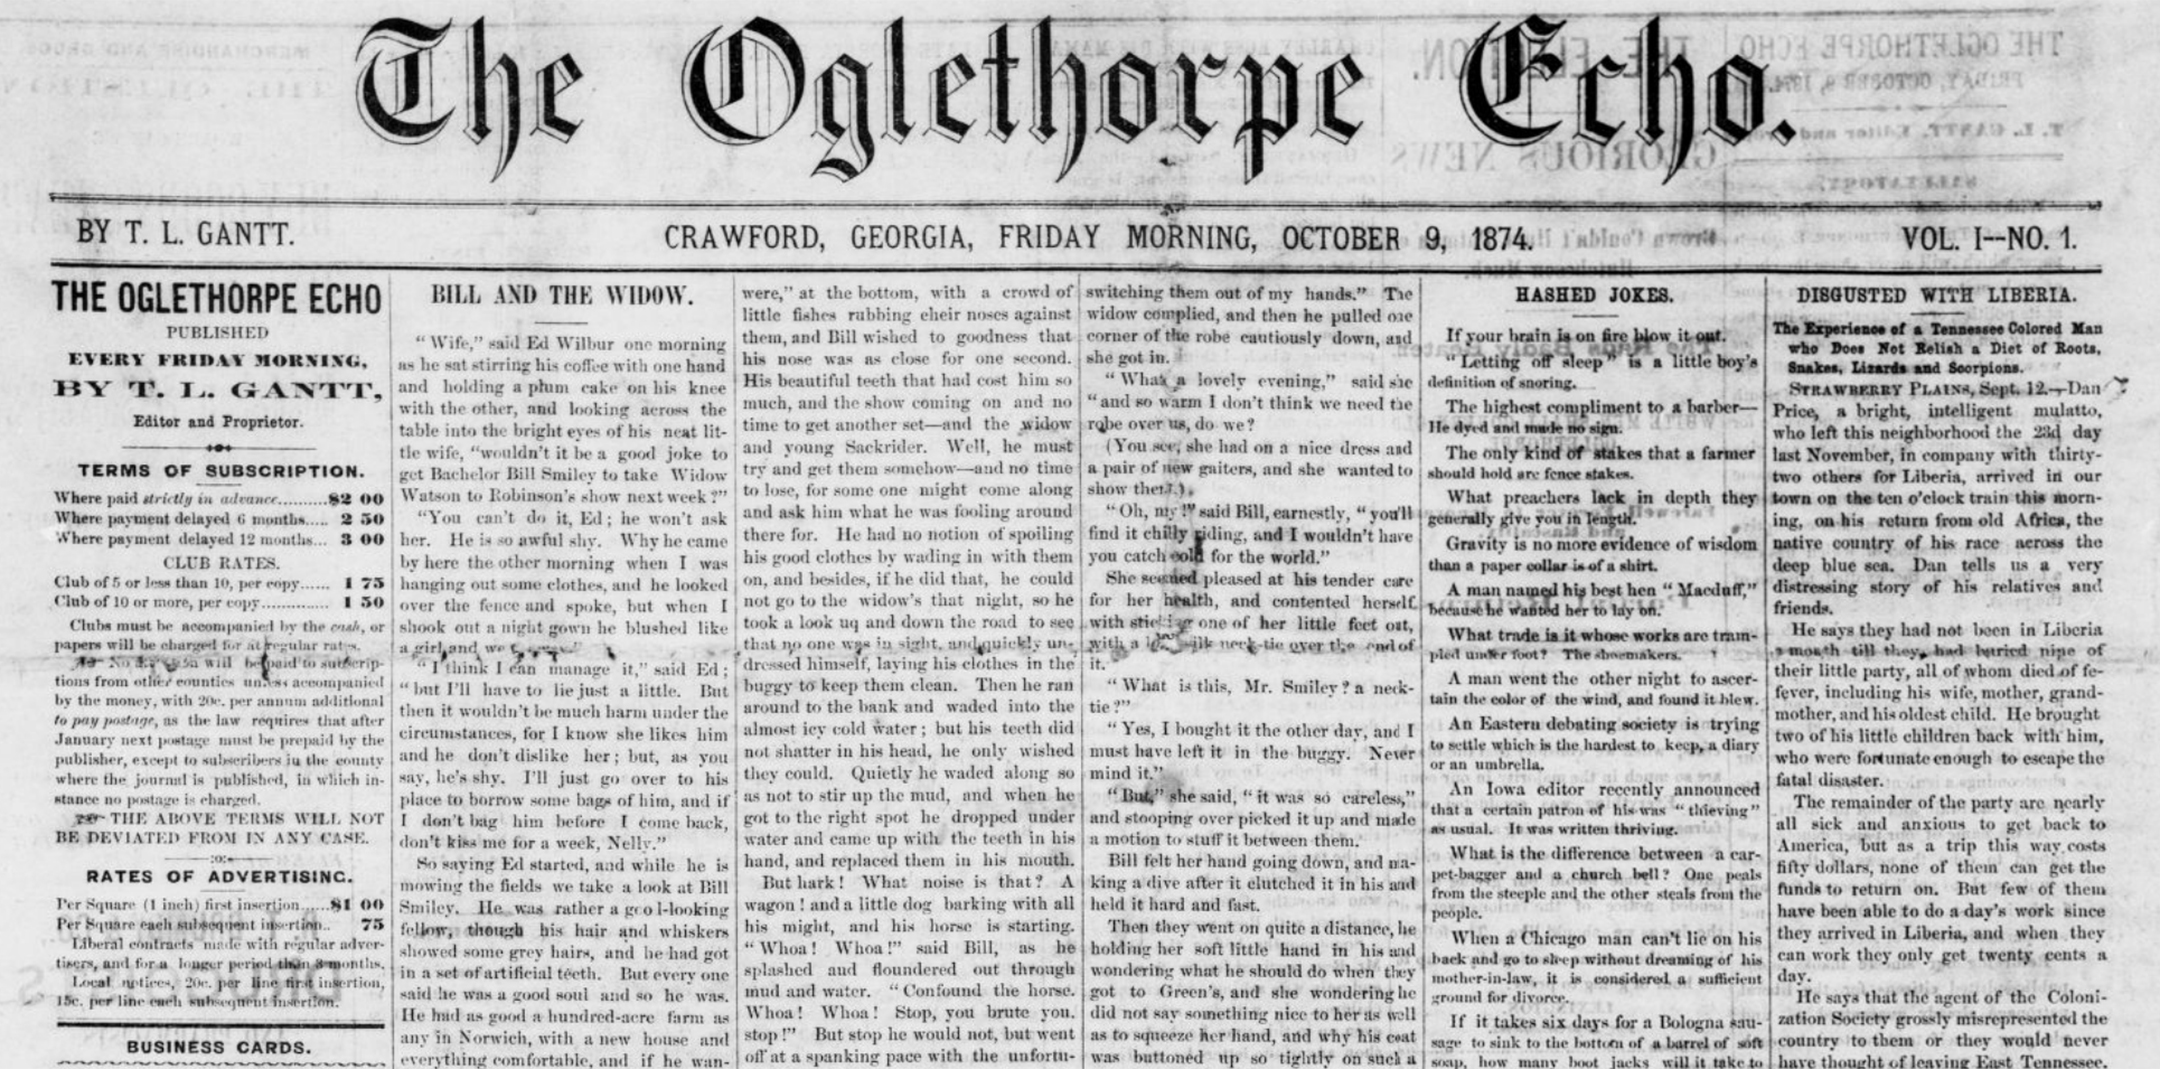 Black and white copy of the front page of a newspaper